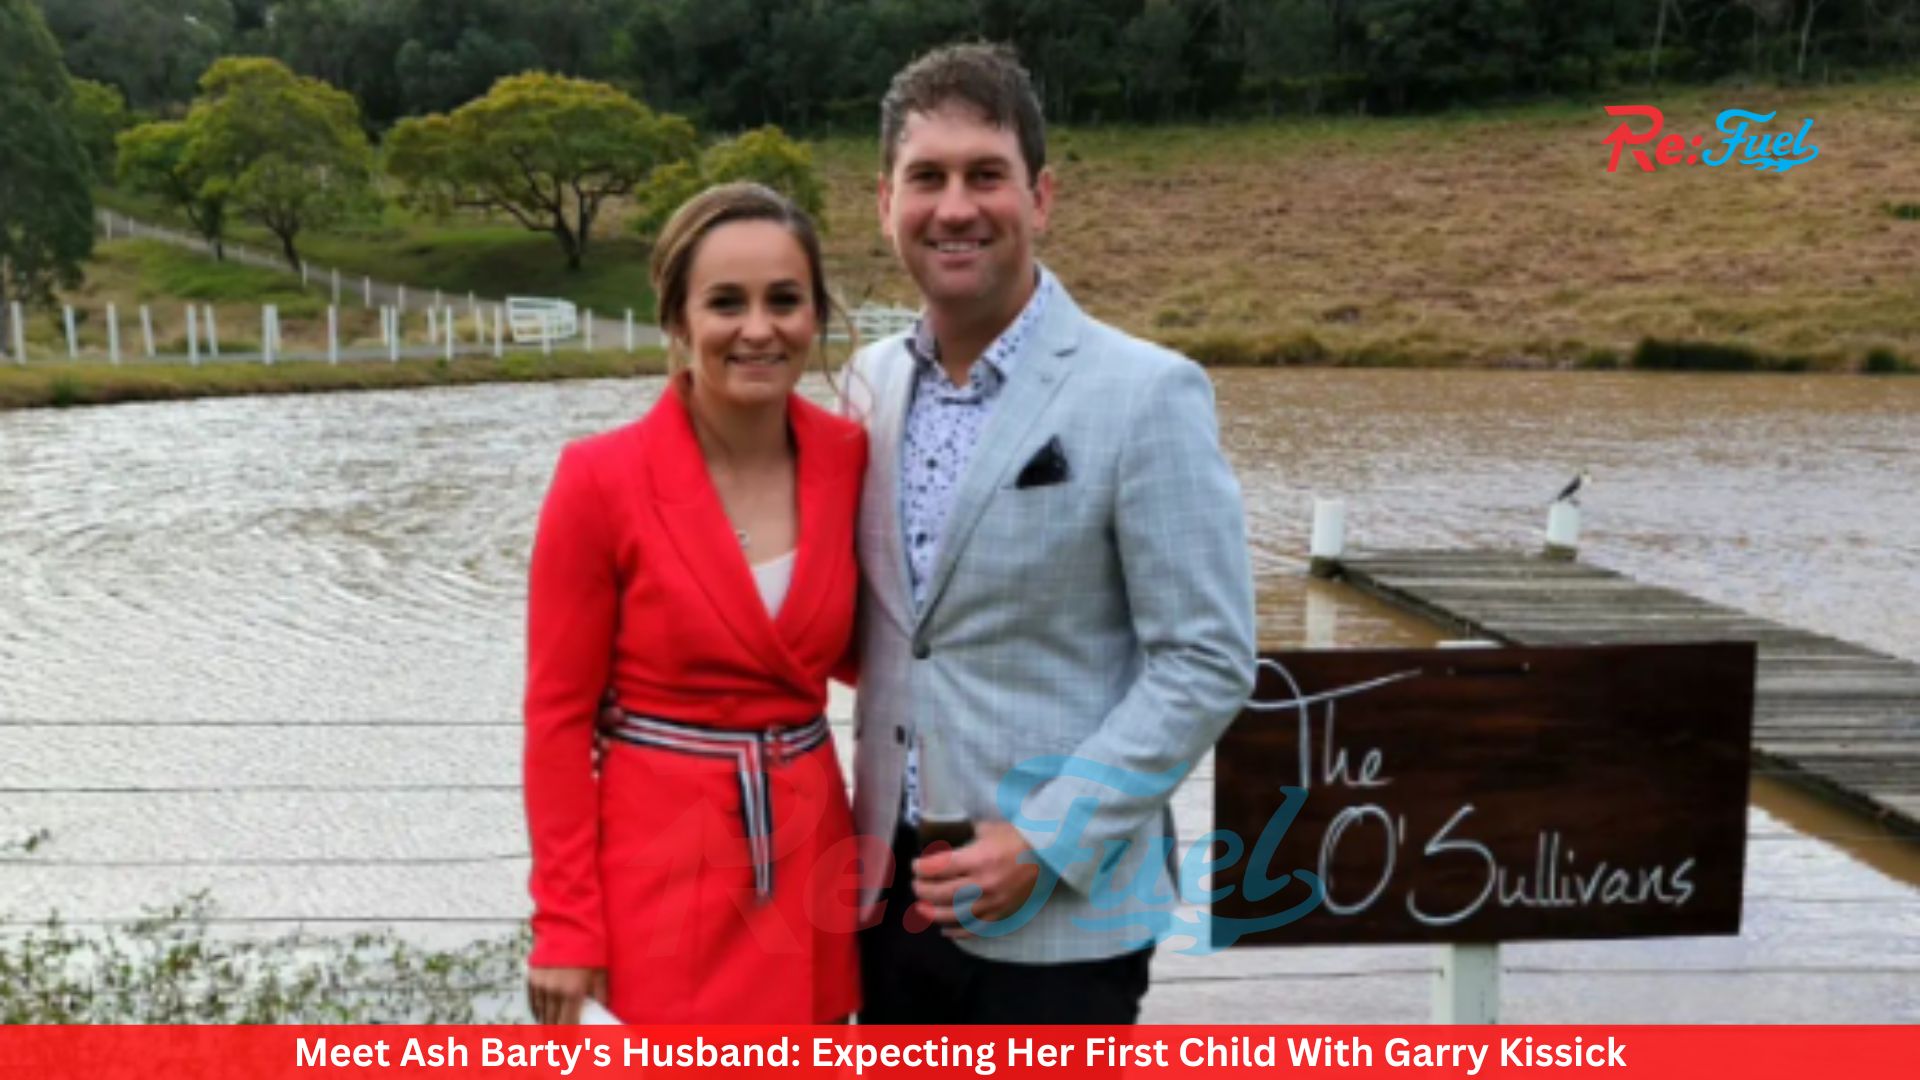 Meet Ash Barty's Husband: Expecting Her First Child With Garry Kissick